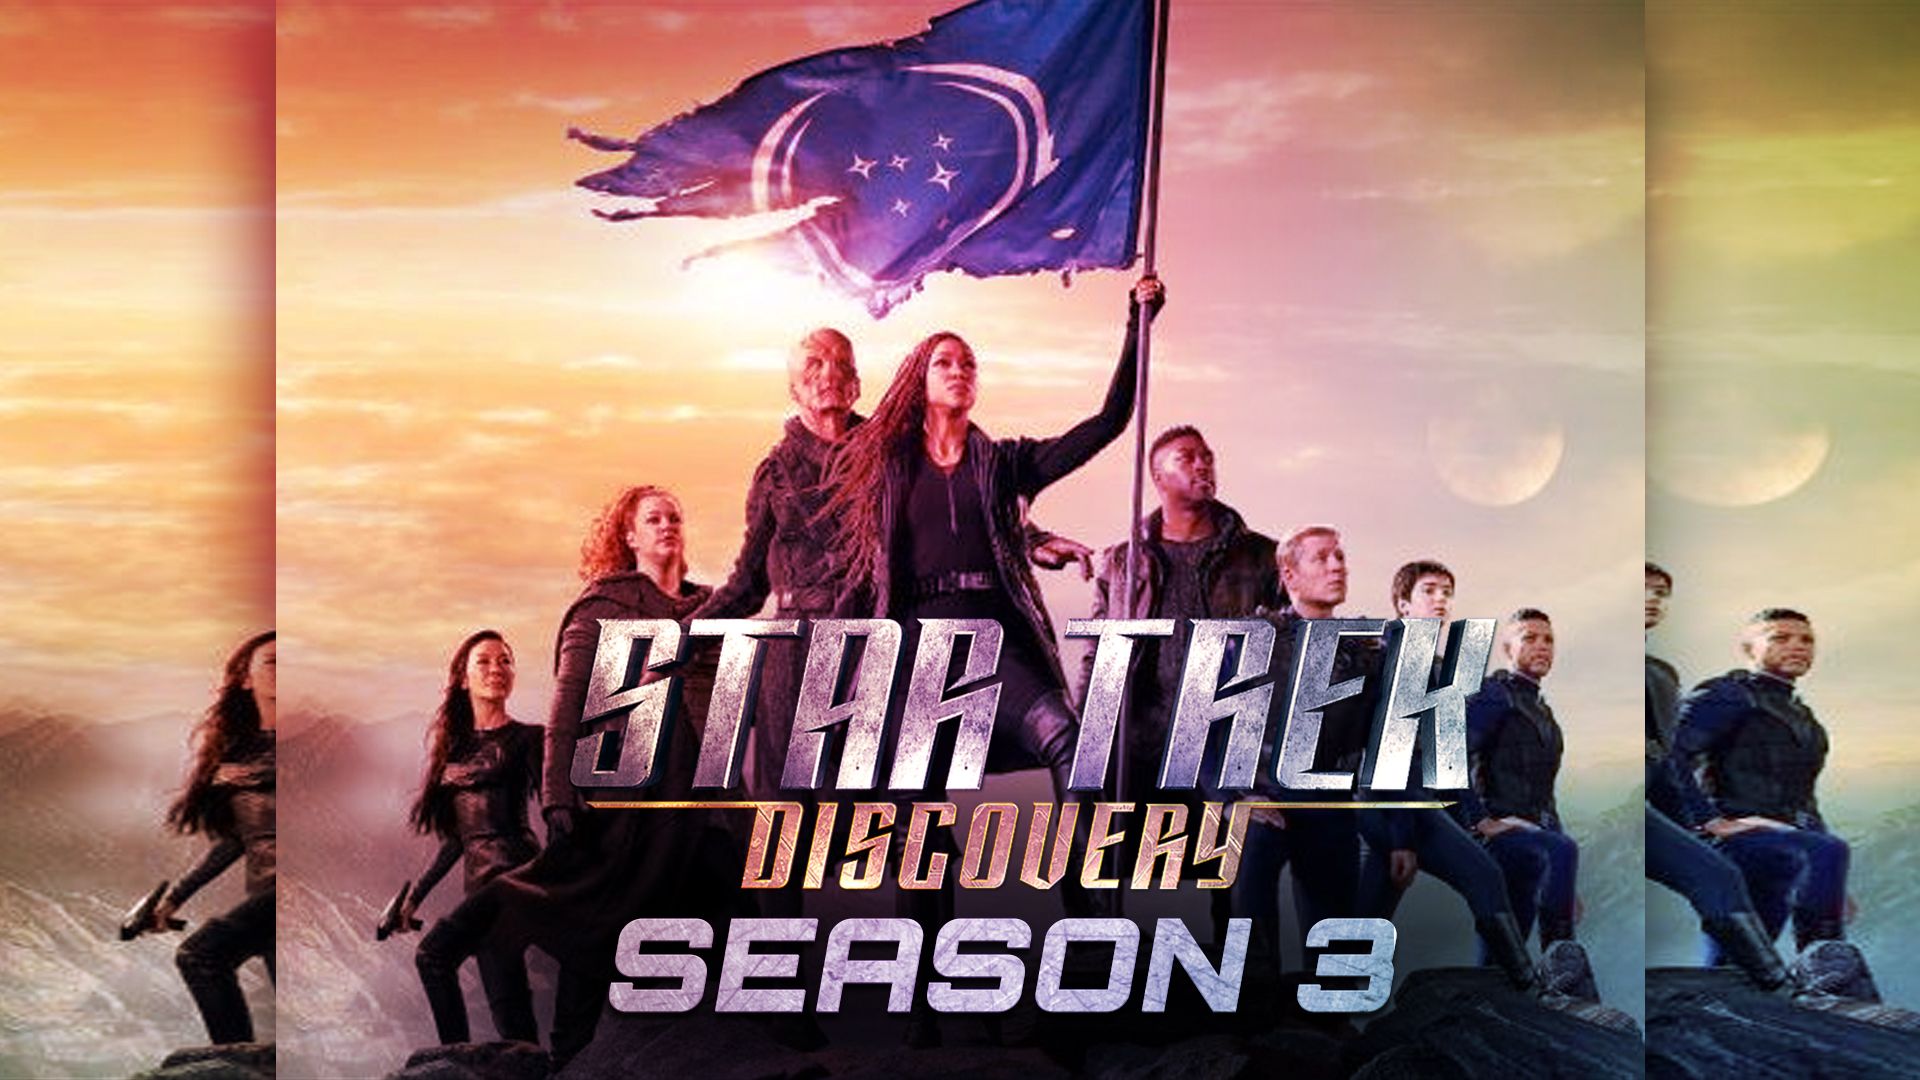 Star Trek Discovery Season 3: Will Michelle Yeoh” return in the upcoming season? Click to know!